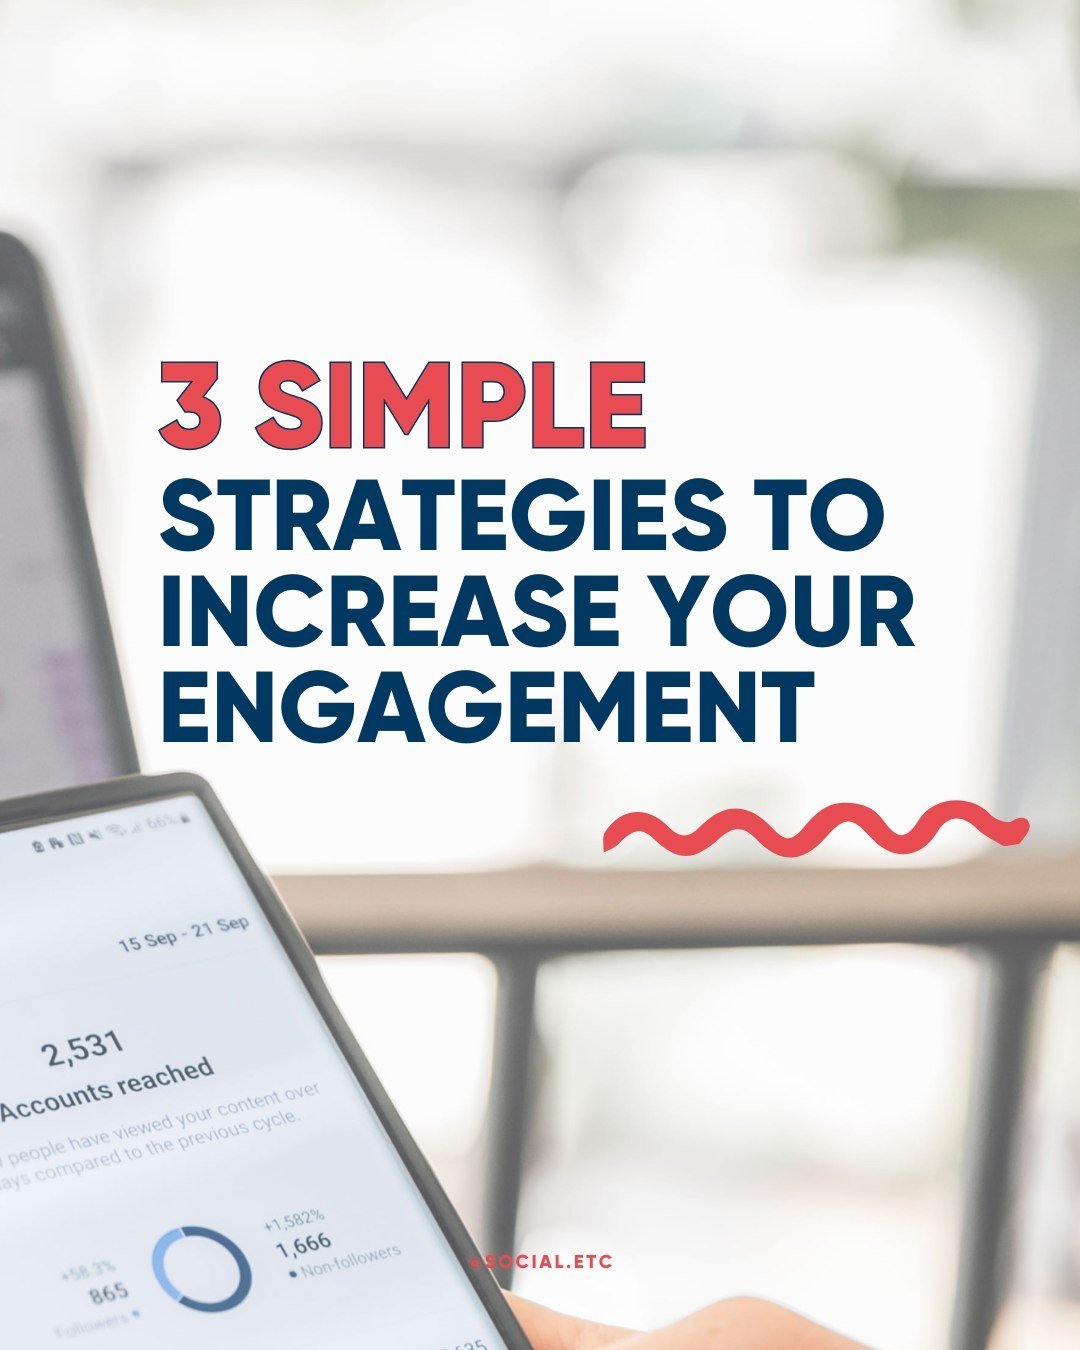 Three must-try ways to increase engagement within your social media community 💬

&ndash; Proactively engaging with other accounts in your niche. I'm talking about leaving meaningful comments, starting conversations or offering insight, not just leav